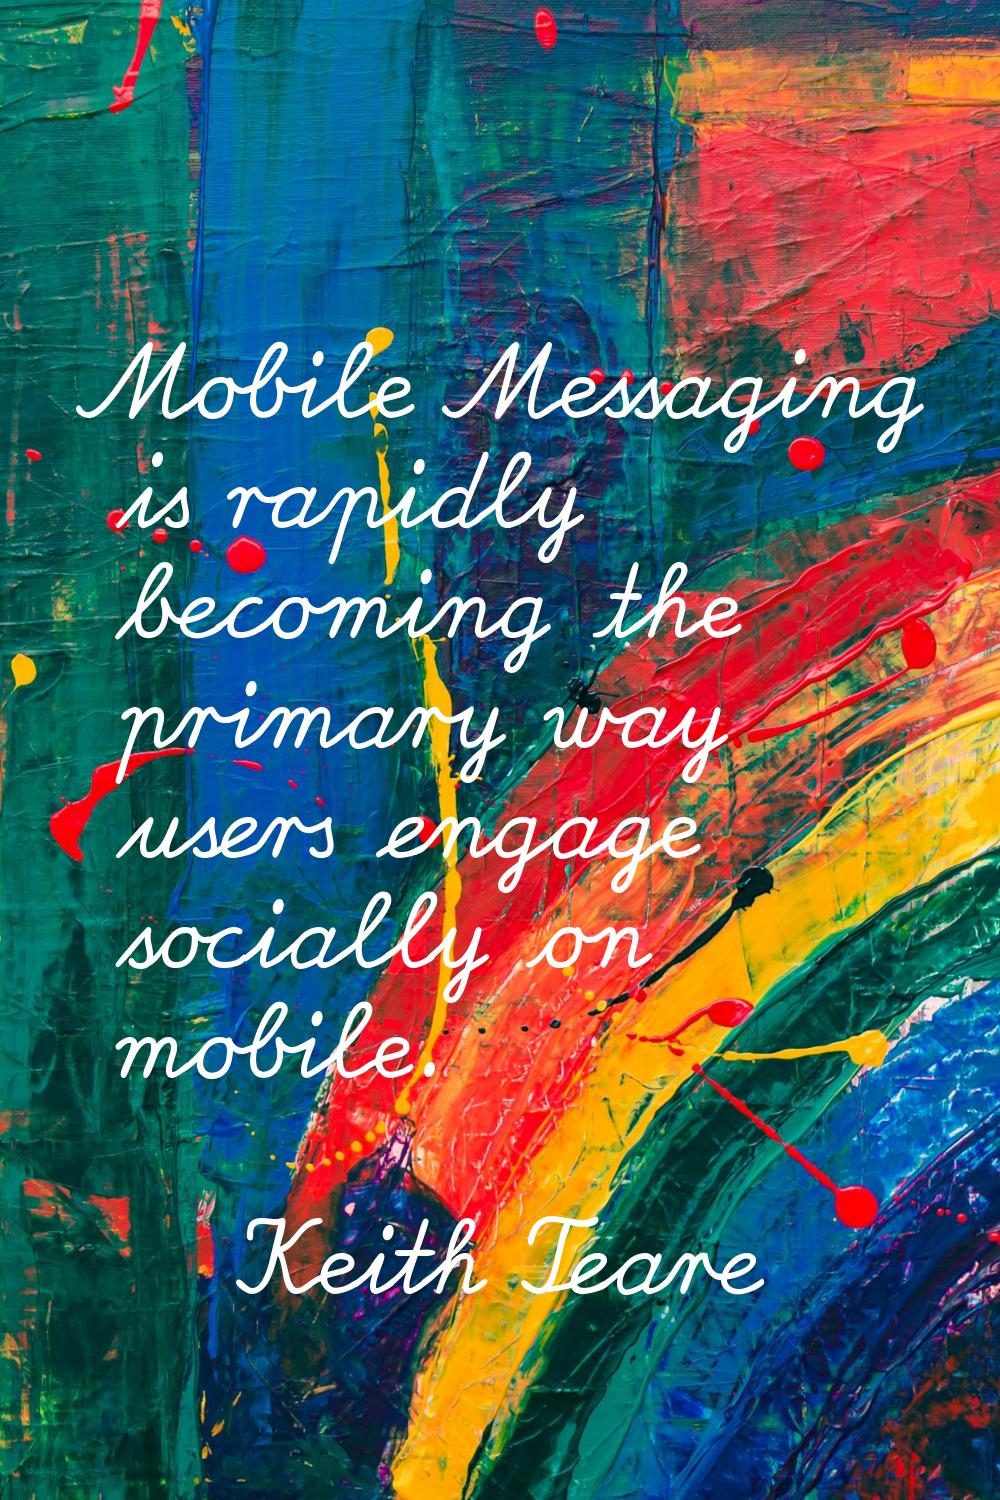 Mobile Messaging is rapidly becoming the primary way users engage socially on mobile.